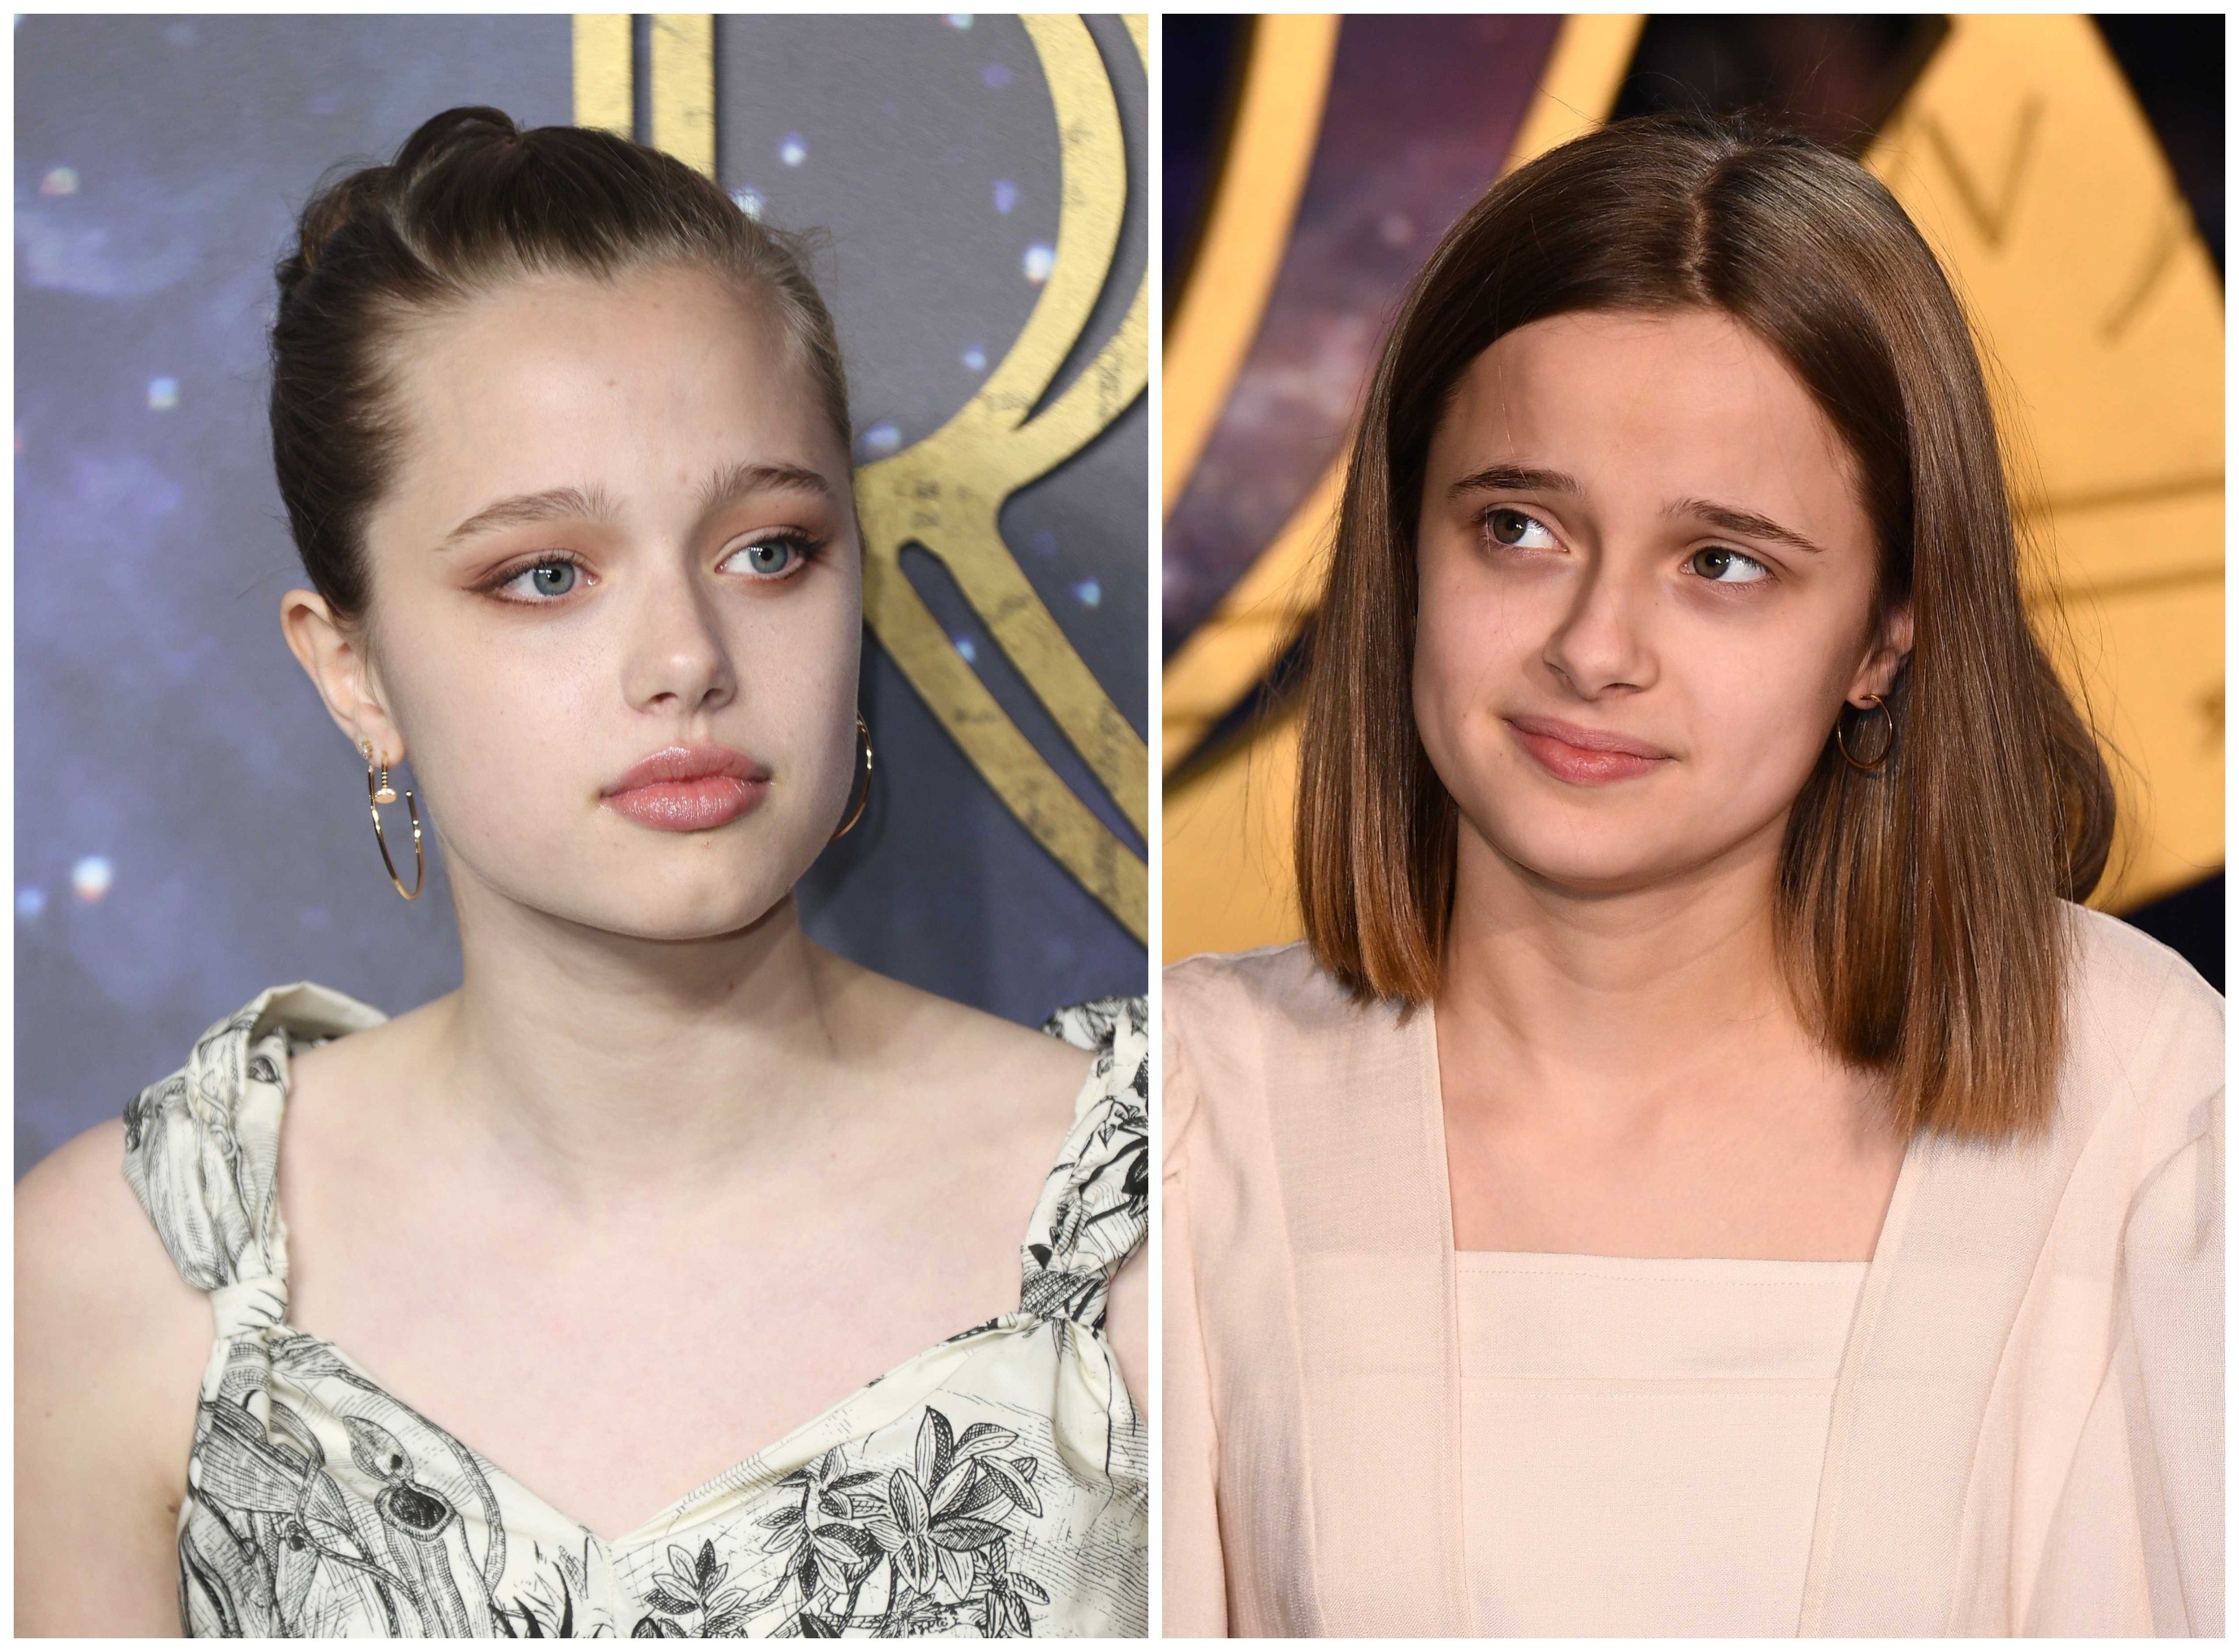 Sisters Shiloh and Vivienne Jolie-Pitt have more in common than just A-list genes. Photos: Getty